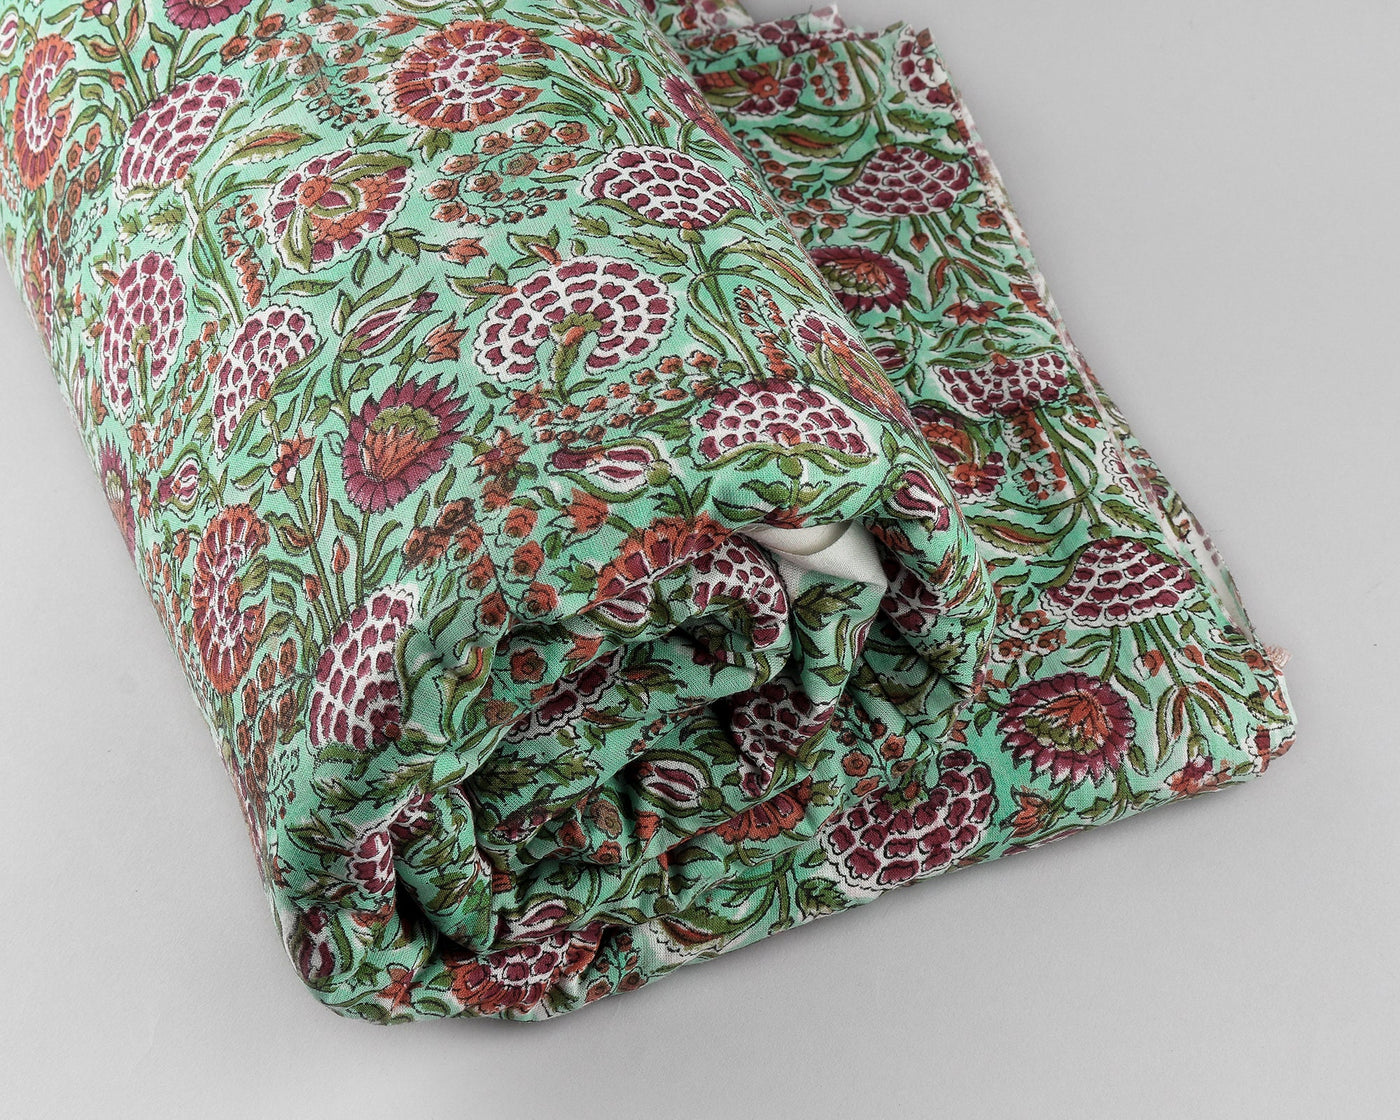 Pastel Mint Green, Dark Cherry, Vermillion Red Indian Hand Block Printed 100% Pure Cotton Cloth, Fabric by the yard, Womens clothing Curtain